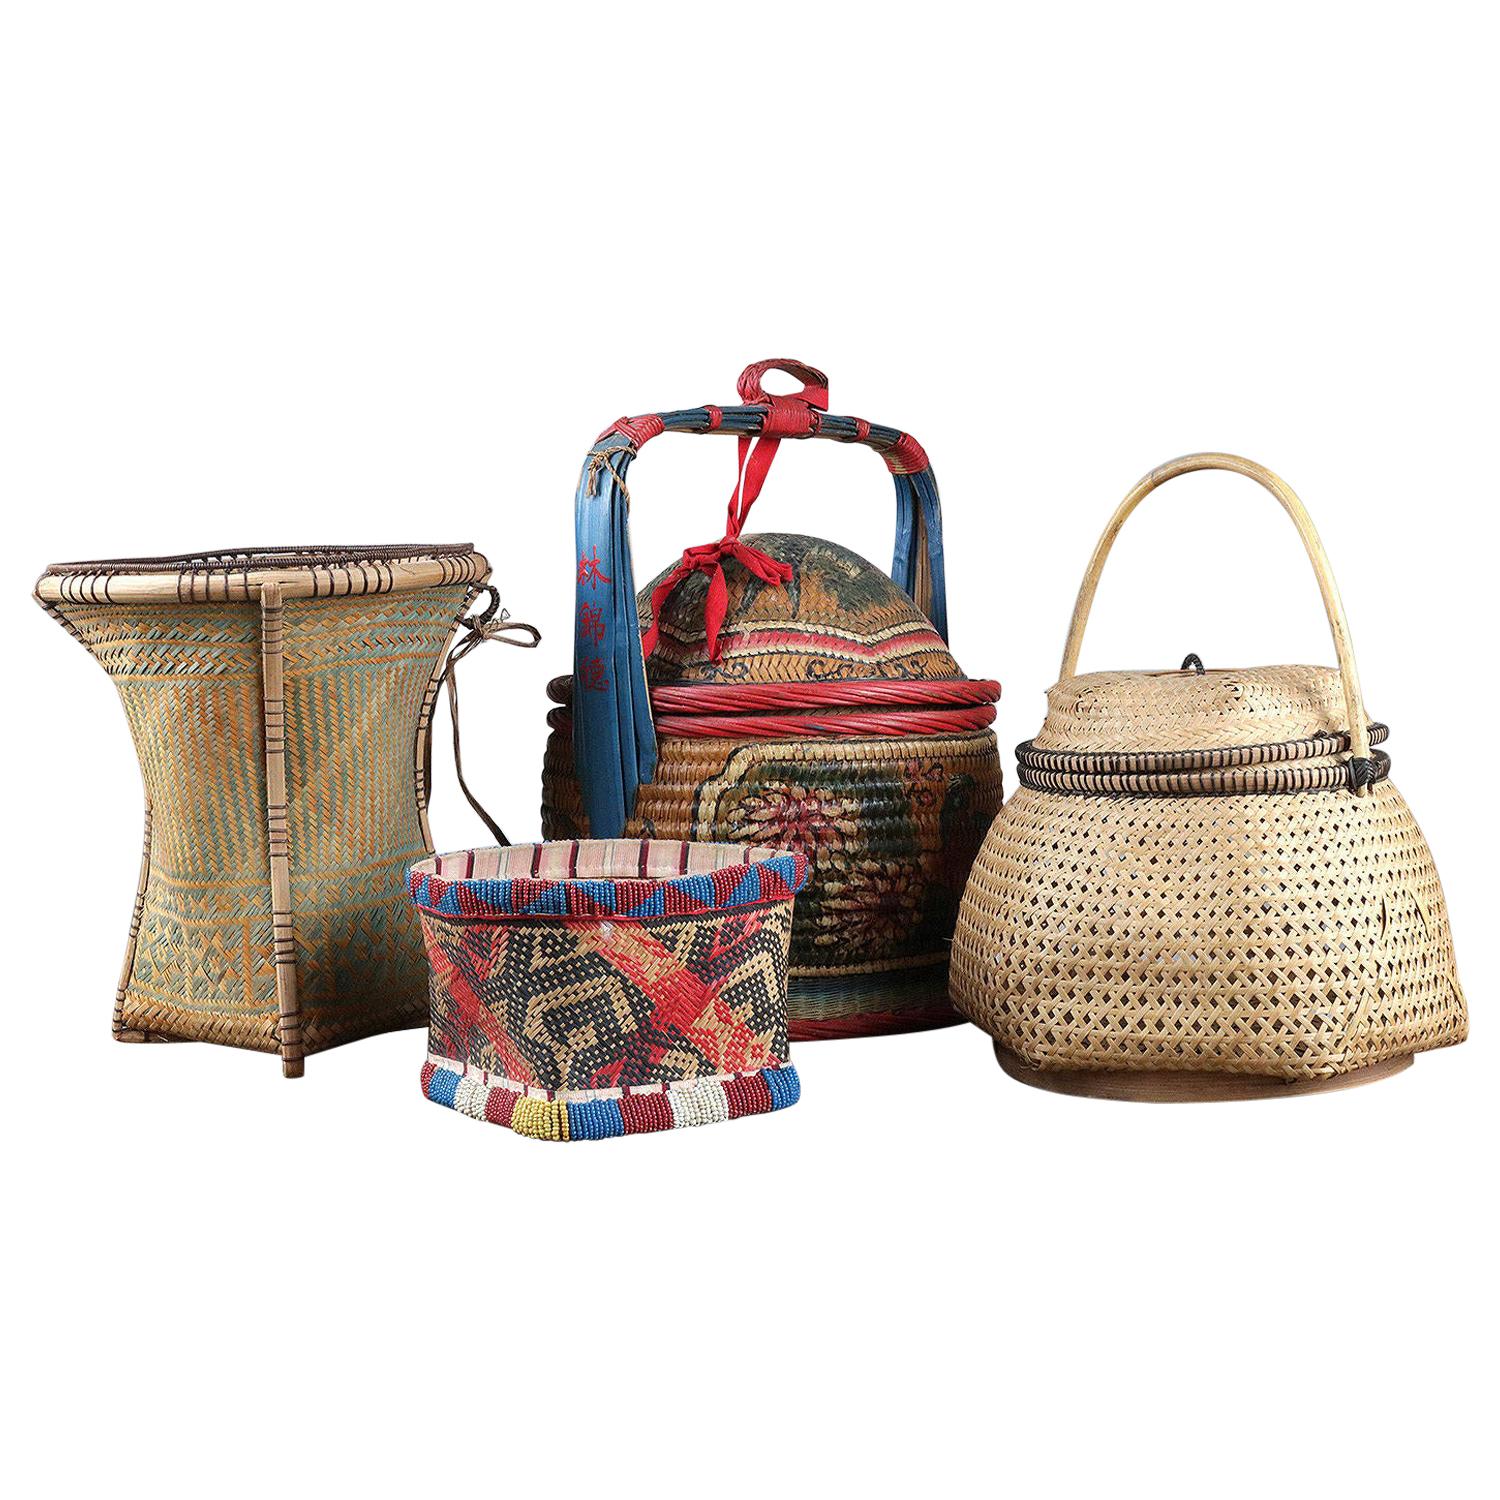 Original Chinese Woven Wicker Baskets, 20th Century For Sale